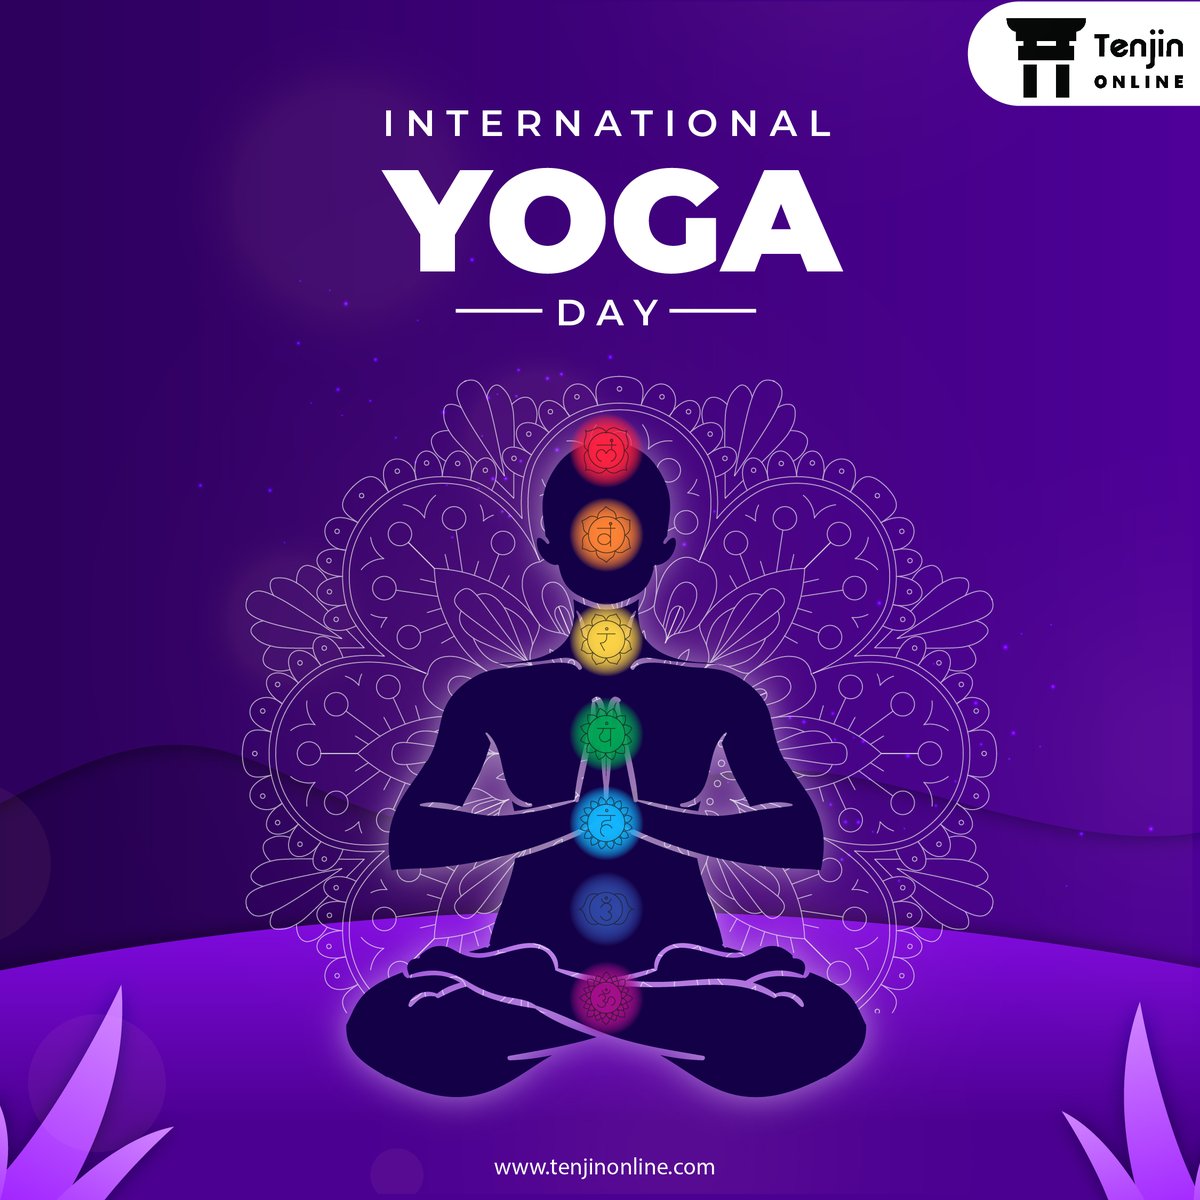 On this special day, let's spread the significance of yoga, transcending boundaries of age, gender, religion, and nationality. Happy International Yoga Day!

#yogaday #internationalyogaday #internationalyogaday2023 #yoga #yogalifestyle #softwaretestingcompany #apptesting